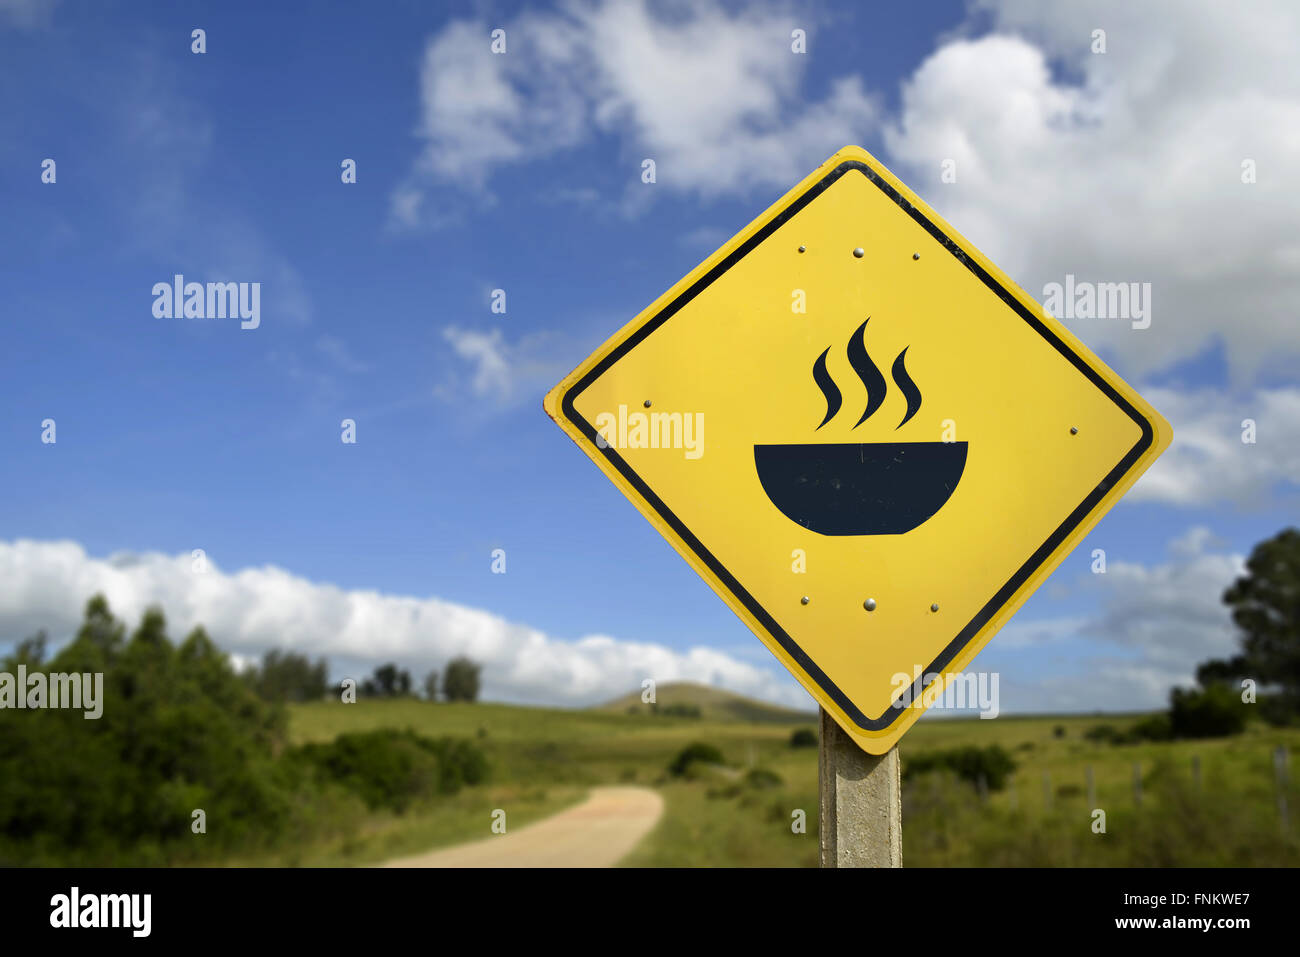 Eat natural food this way, organic home made meal concept. Road sign with hot dish gourmet icon in countryside landscape, Stock Photo